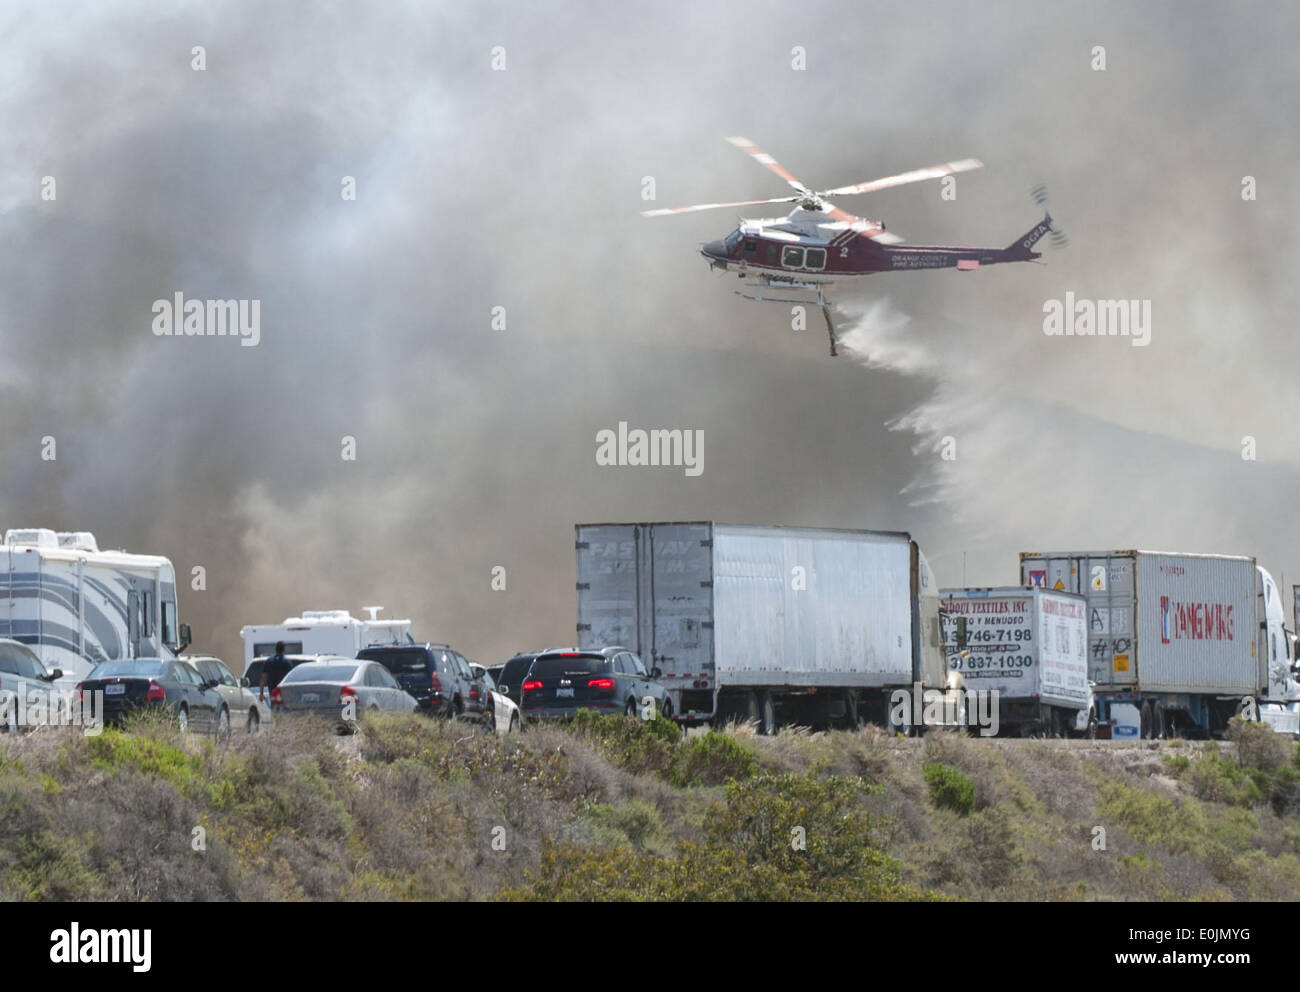 San Onofre, California, USA. 13th May, 2013. A water dropping helicopter comes in low over the I-5 freeway on Wednesday morning dropping sea water on to a fire burning just east along the northbound lanes. Multiple Fire agencies, including Federal, State and County, responded to a wildfire on at the San Clemente Check Point that began when a truck on the northbound I-5 Freeway caught fire and passed to nearby vegetation on Wednesday morning. The Pendleton West Fire, had north and south bound trafficstopped, along with Amtrak Passenger Train traffic, as firefighters fought to contain the 150 p Stock Photo